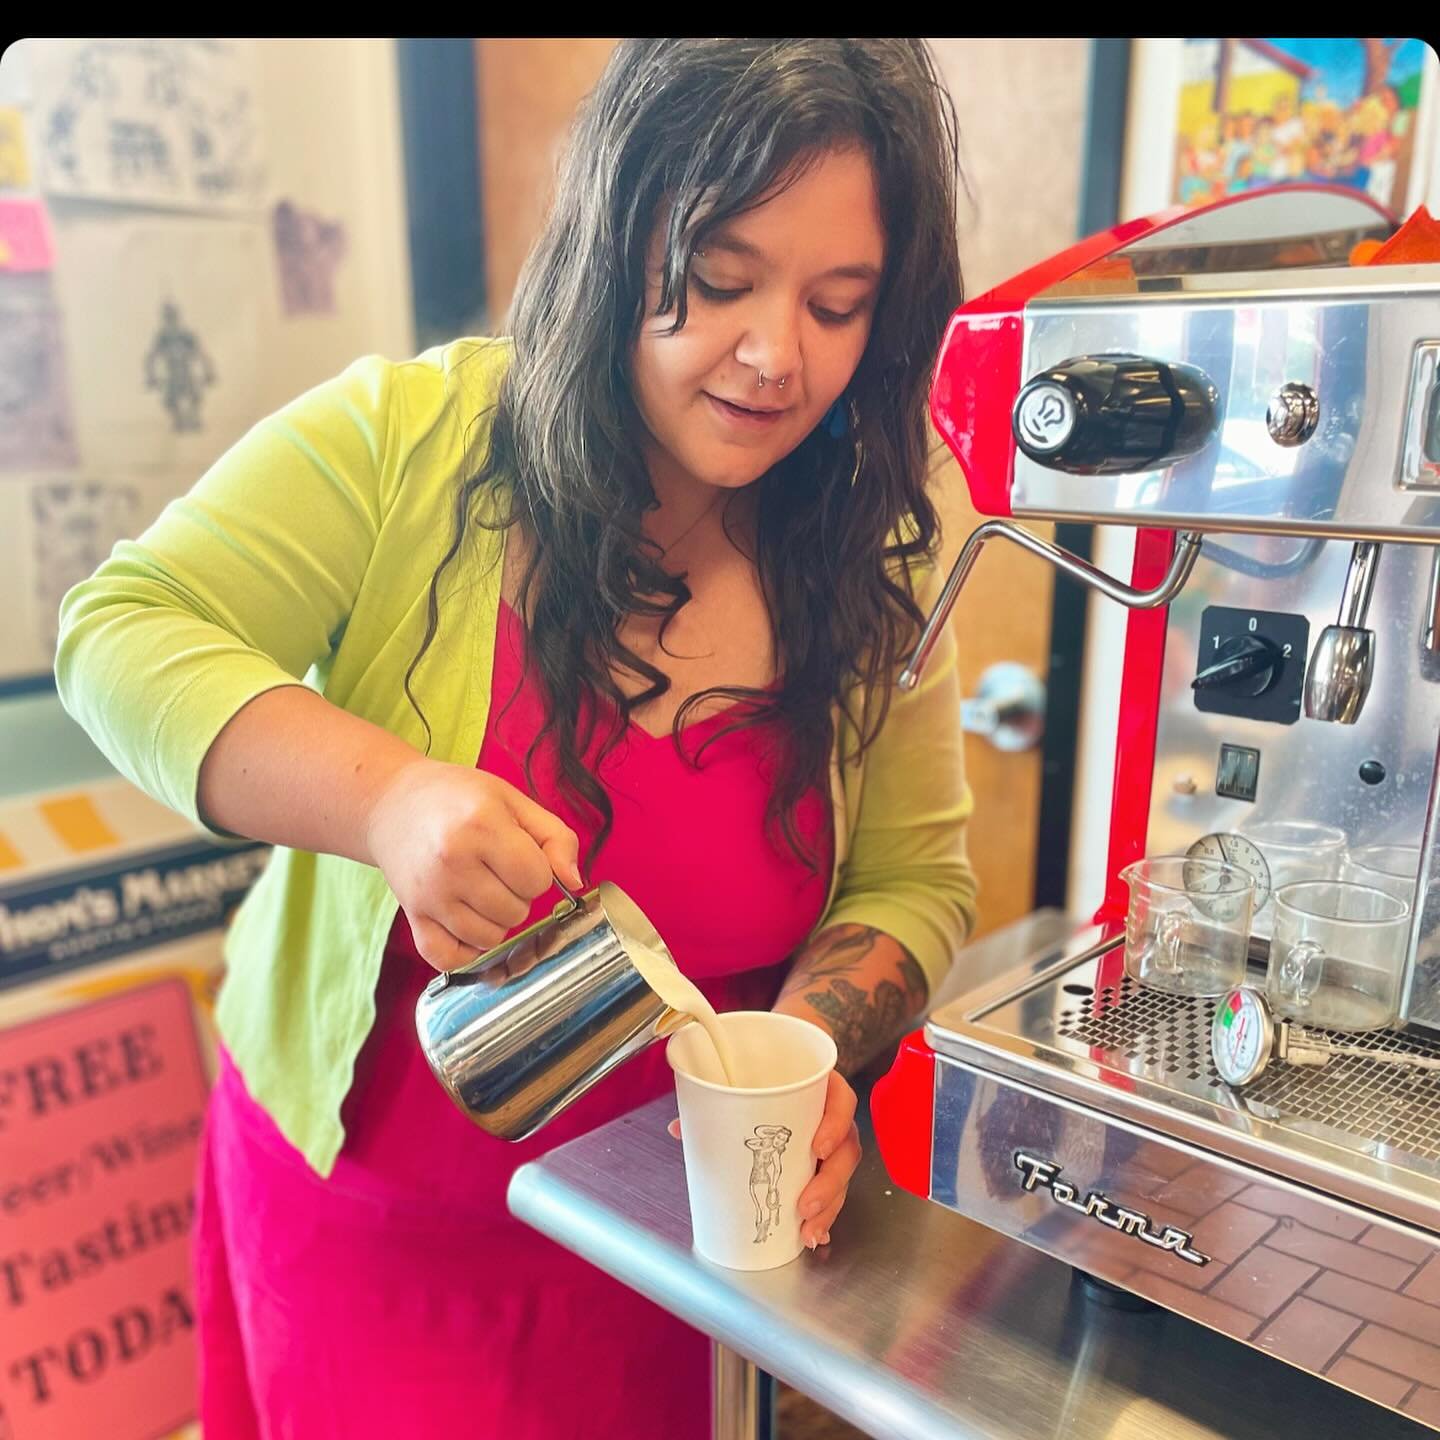 Soy sugar-free vanilla cappuccino? Done and done ✅ Thanks @hotel.calliefornia It was delicious!!! Specialty coffee ☕️ now available at our Burnet Rd store! #cappuwhattt